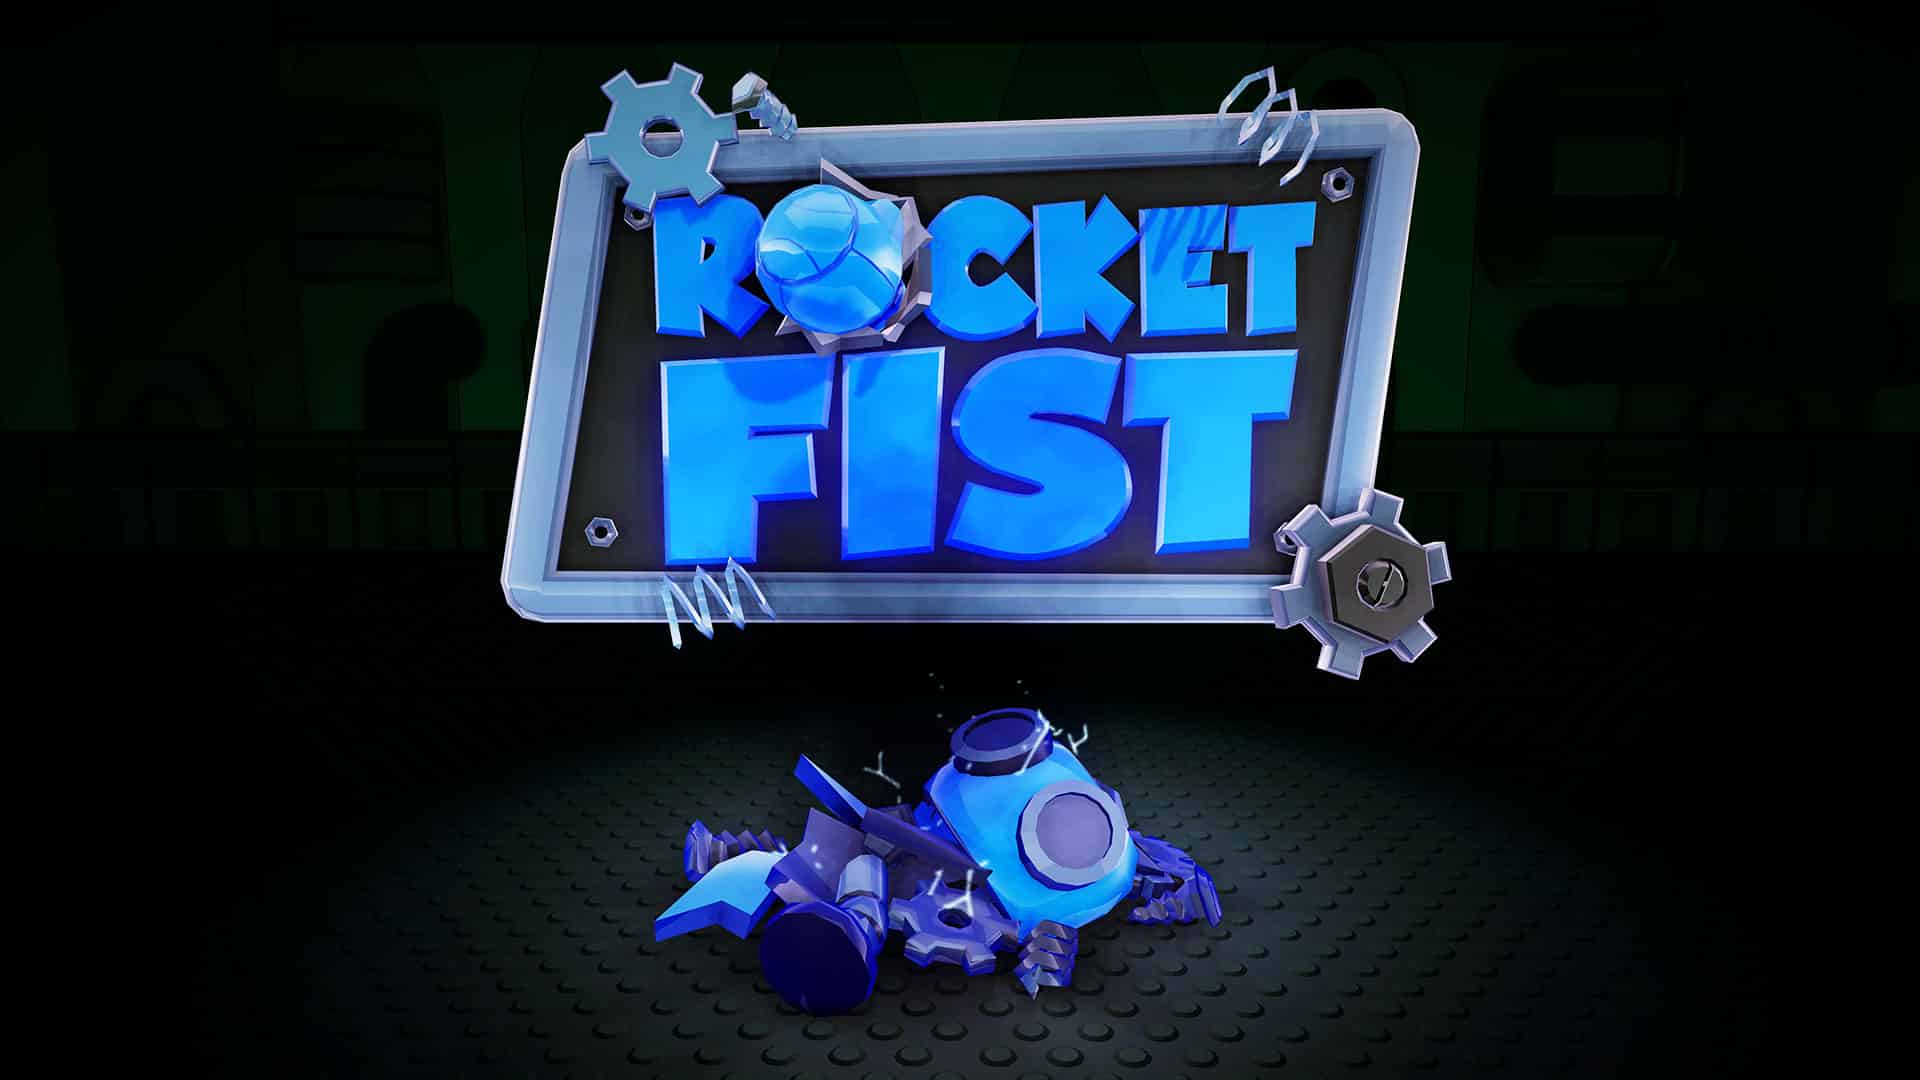 Rocket Fist player count stats